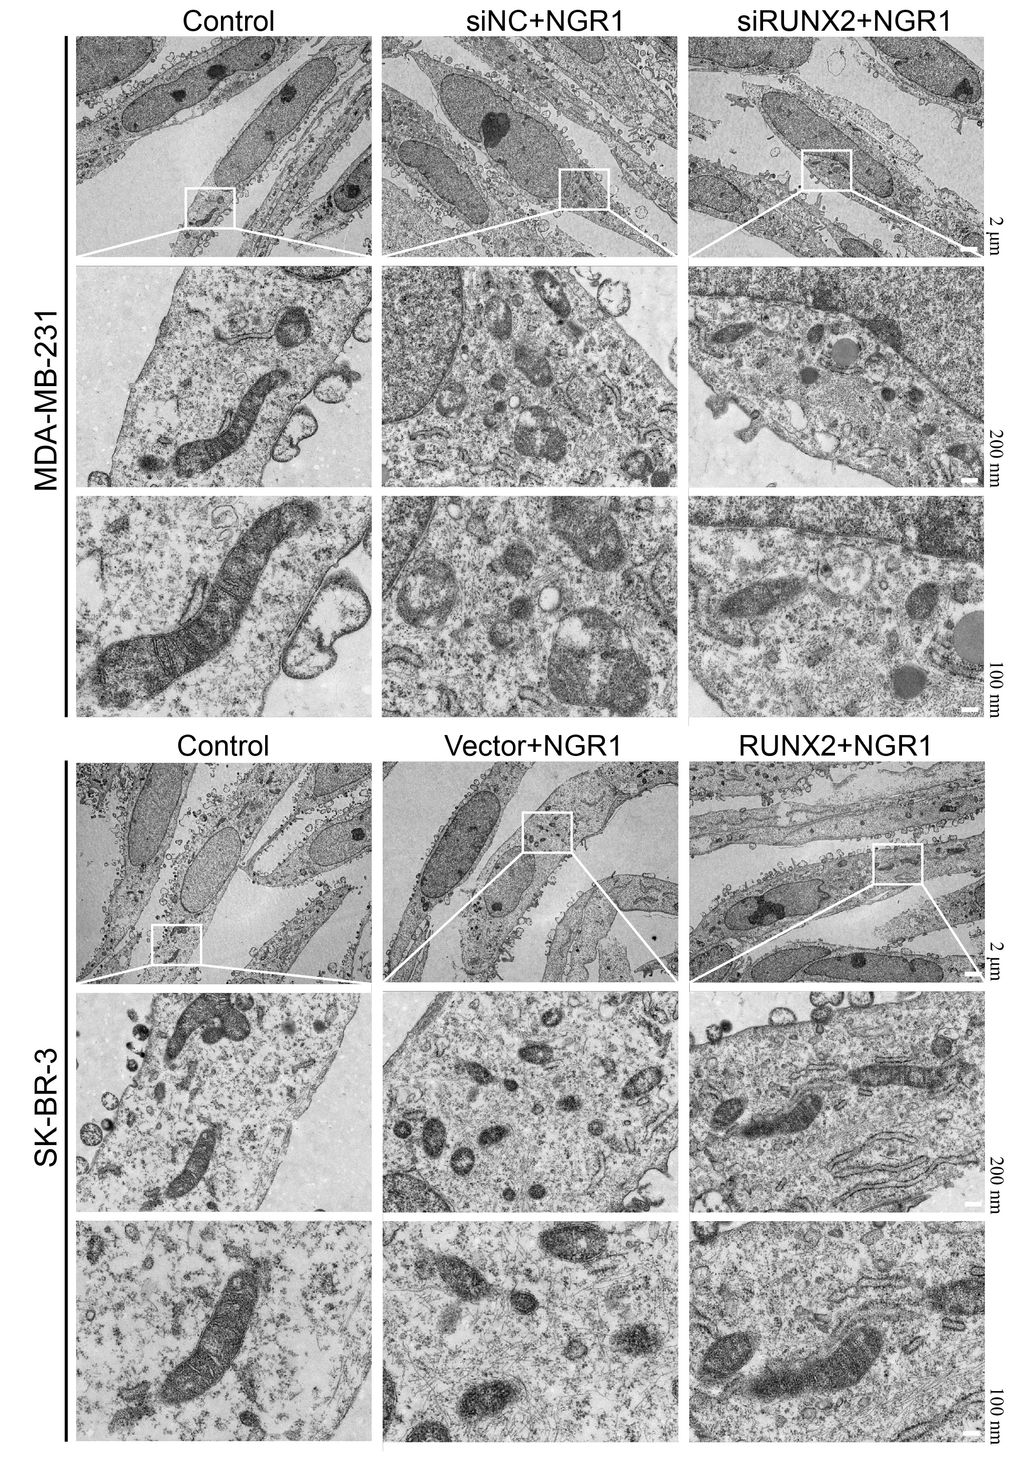 NGR1 disrupts mitochondrial morphology in breast cancer cells by down-regulating RUNX2. The mitochondrial structure of breast cancer cells was observed by electron microscopy after transfection of siRNA in breast cancer MDA-MB-231 for 48 h, transfection of overexpression plasmid in SK-BR-3 for 48 h, and then NRG1 treatment for 48 h.